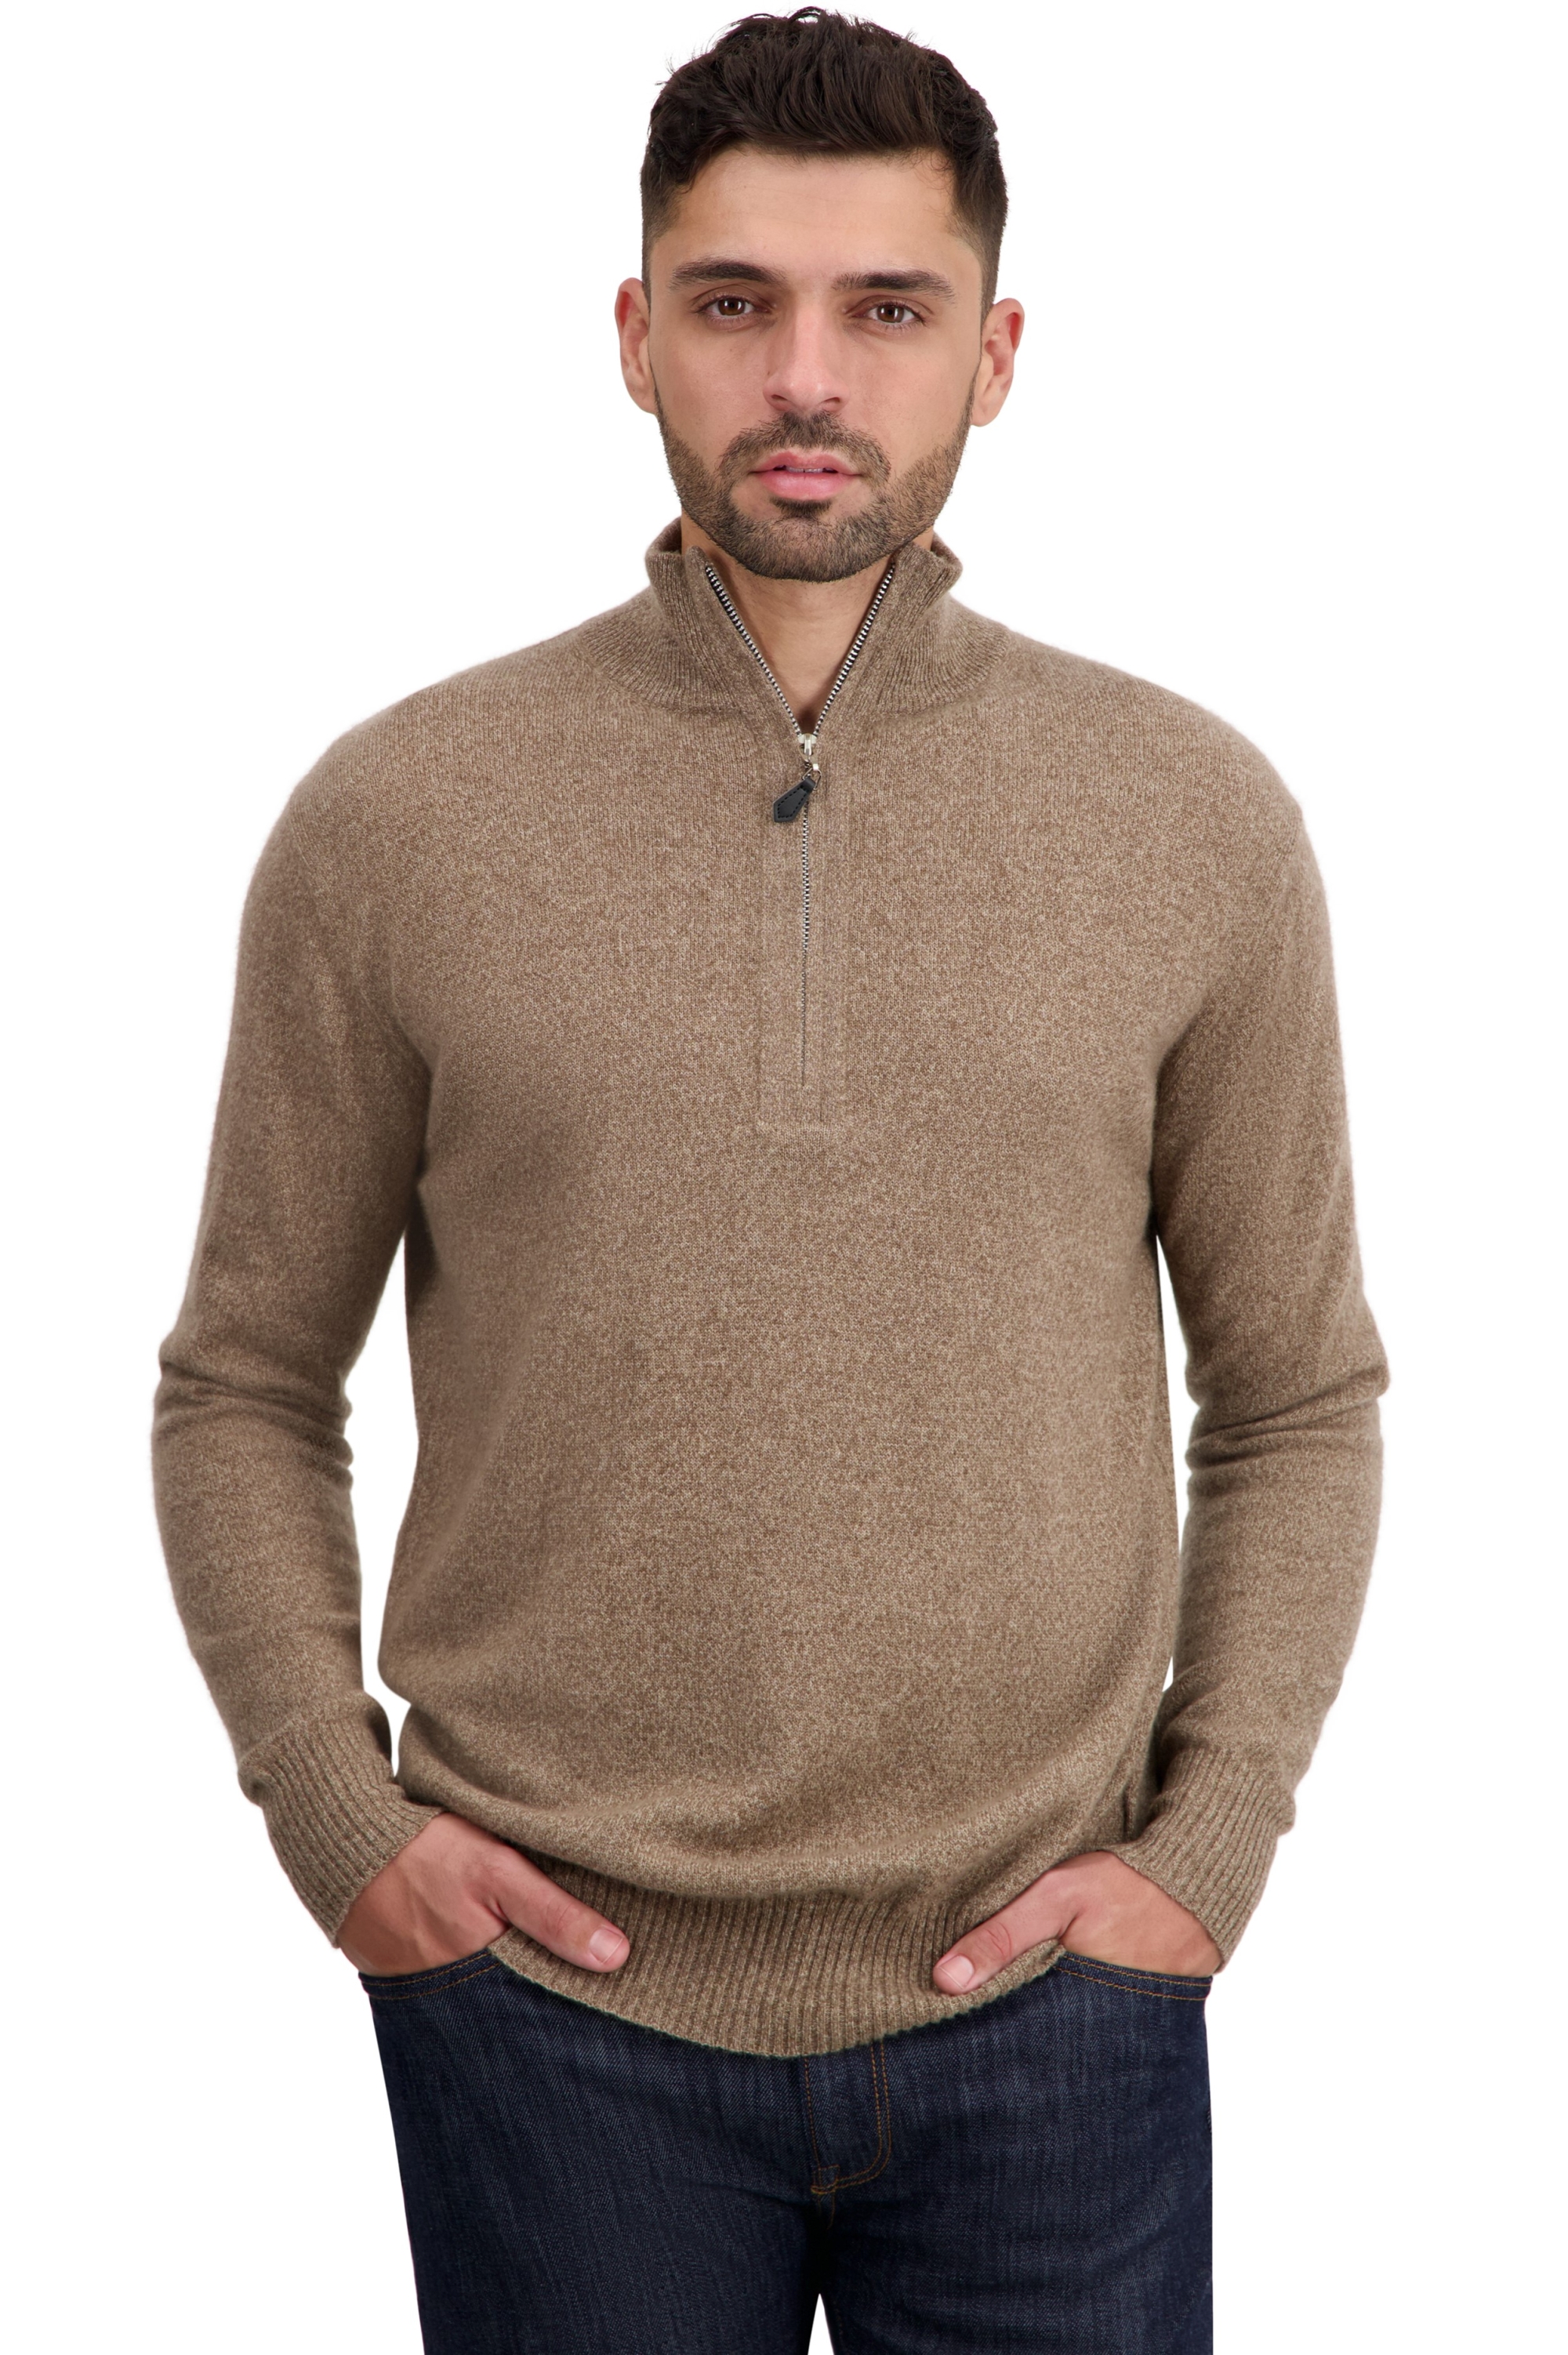 Cachemire pull homme toulon first tan marl 3xl